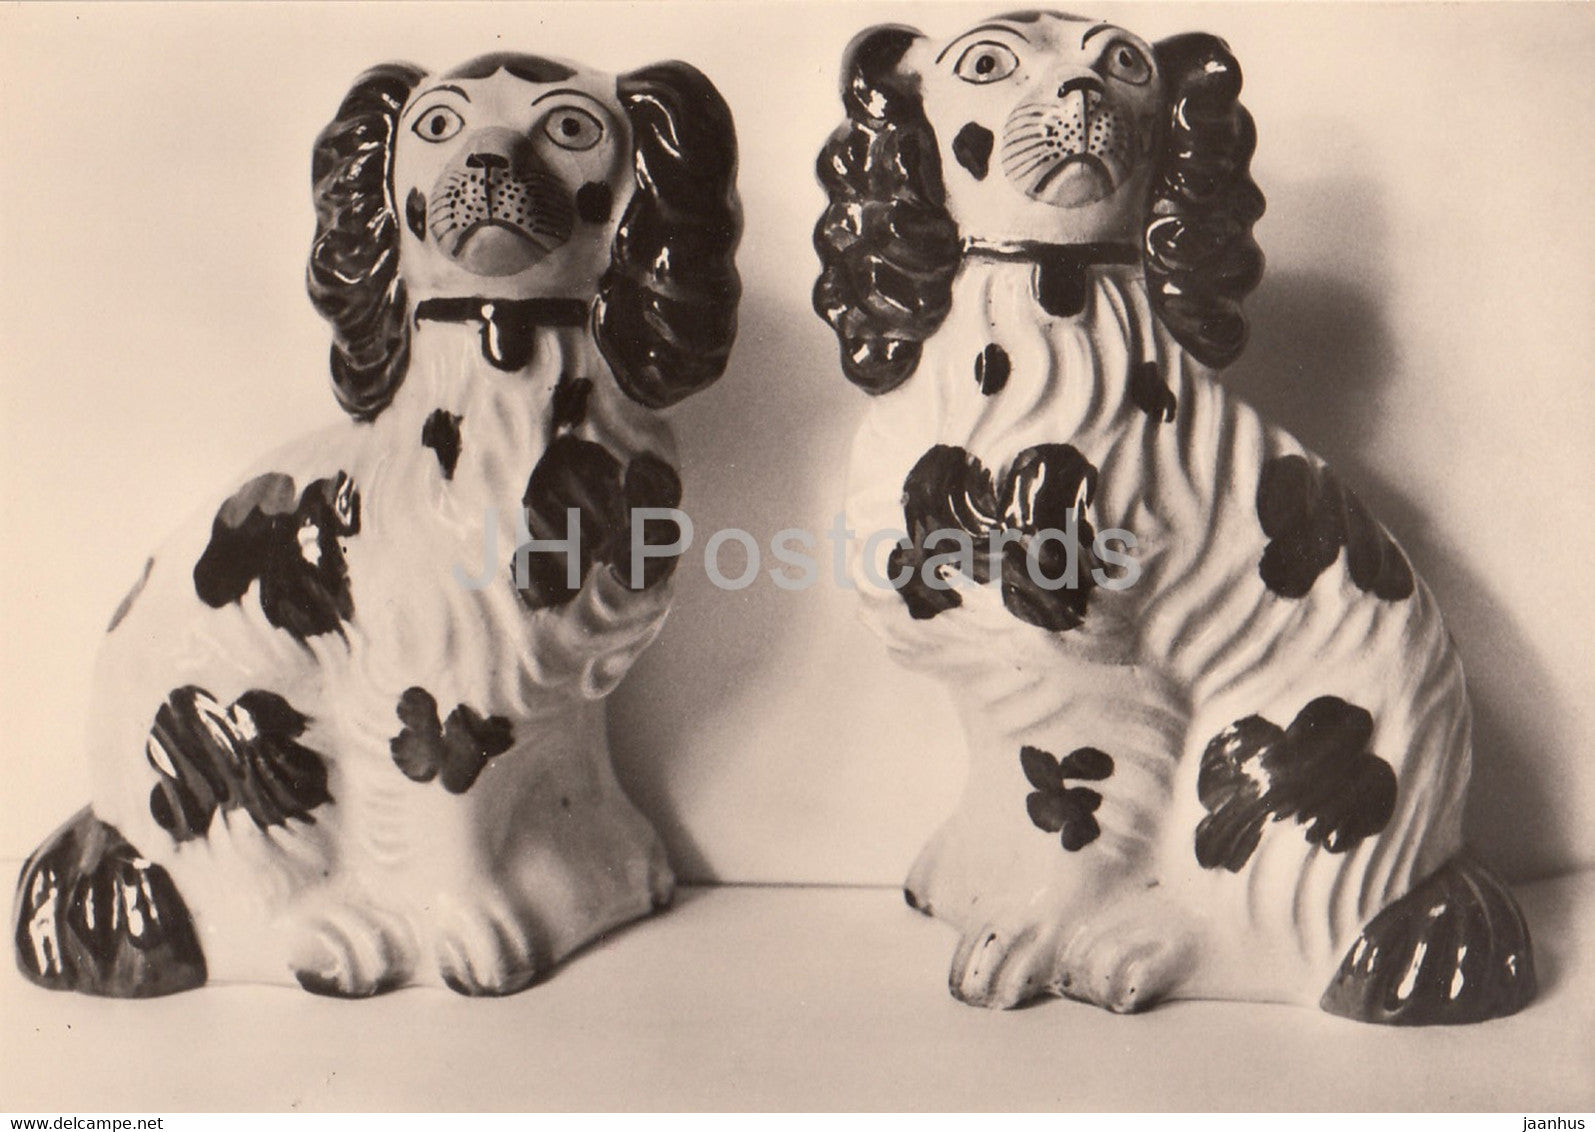 Mitbringsel Monchguter Seeleute - Englische Kaminhunde - English Fireplace Dogs - Germany DDR - unused - JH Postcards